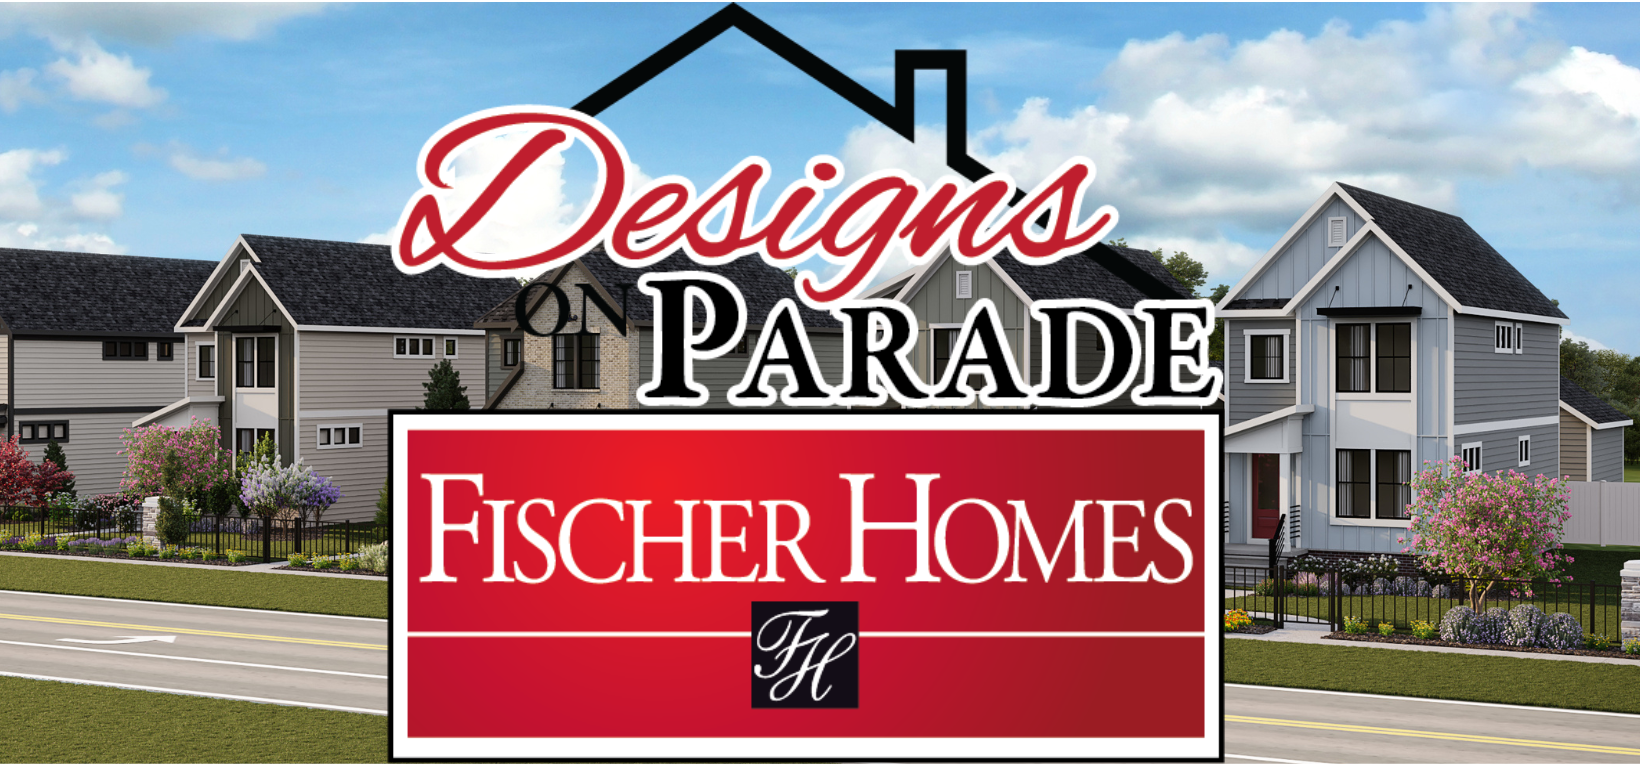 Designs on Parade is Coming to Indianapolis!